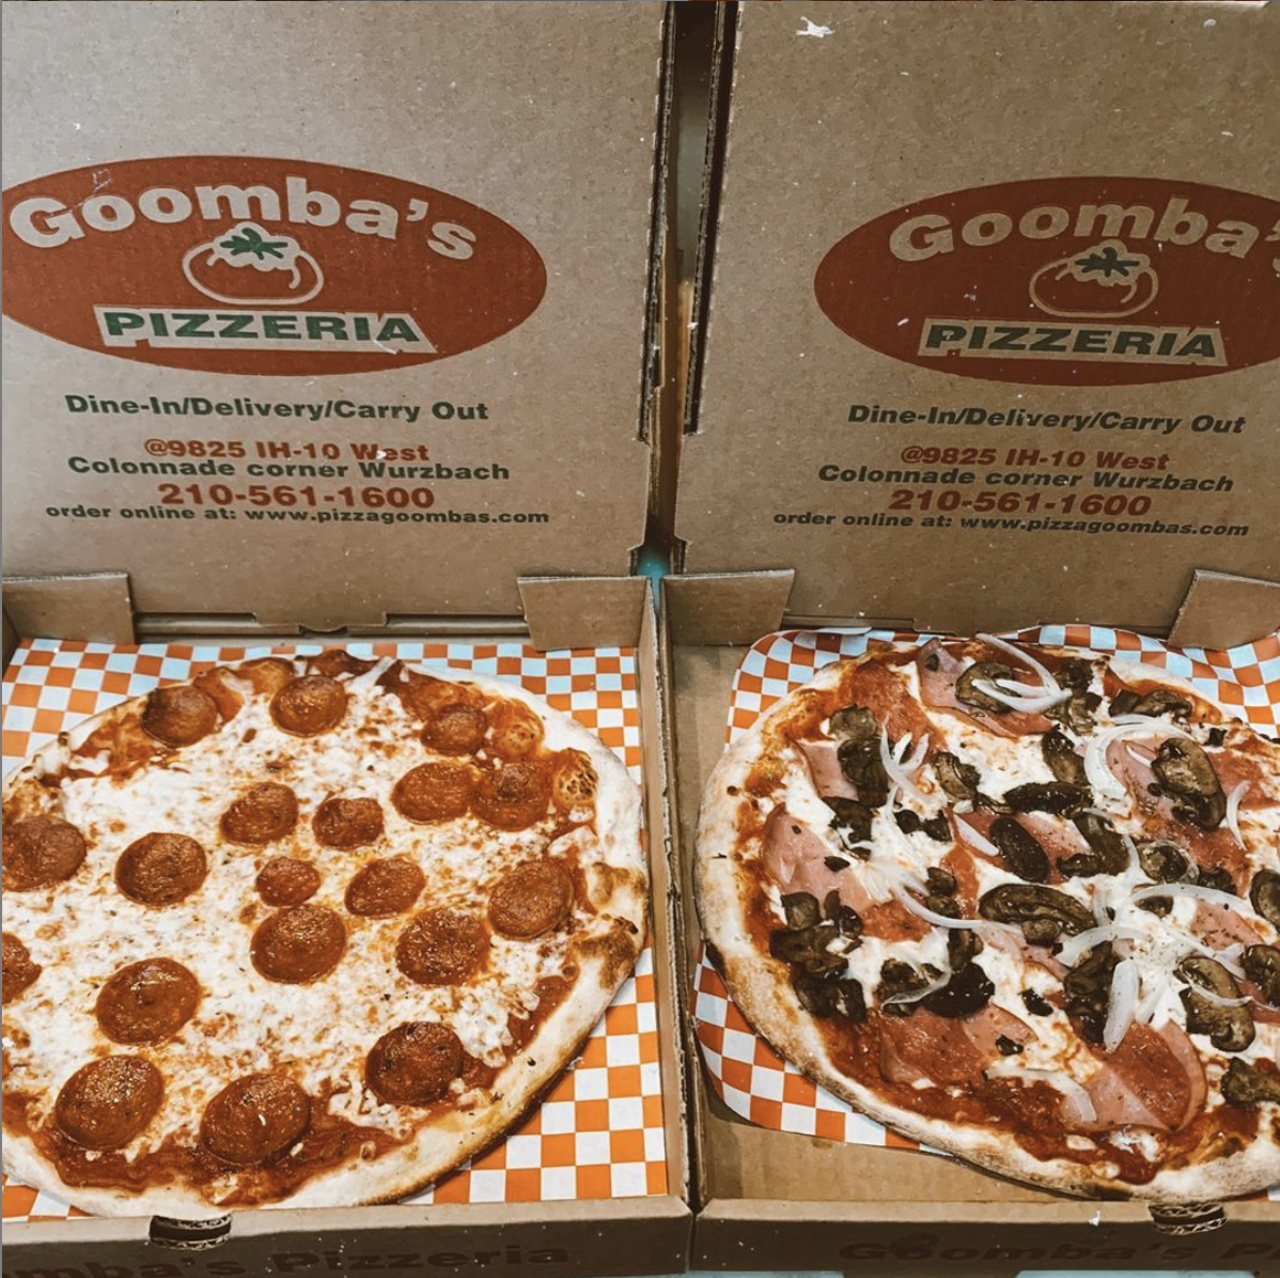 Goomba's Pizza
9825 IH10 Frontage Road, (210) 561-1600, pizzagoombas.com
Goomba's is offering its full menu including make-it-yourself pizza packs for $12. Find Goomba's on GrubHub, UberEats, Favor or SliceLife.  
Photo via Instagram /  
goombas_pizzaria